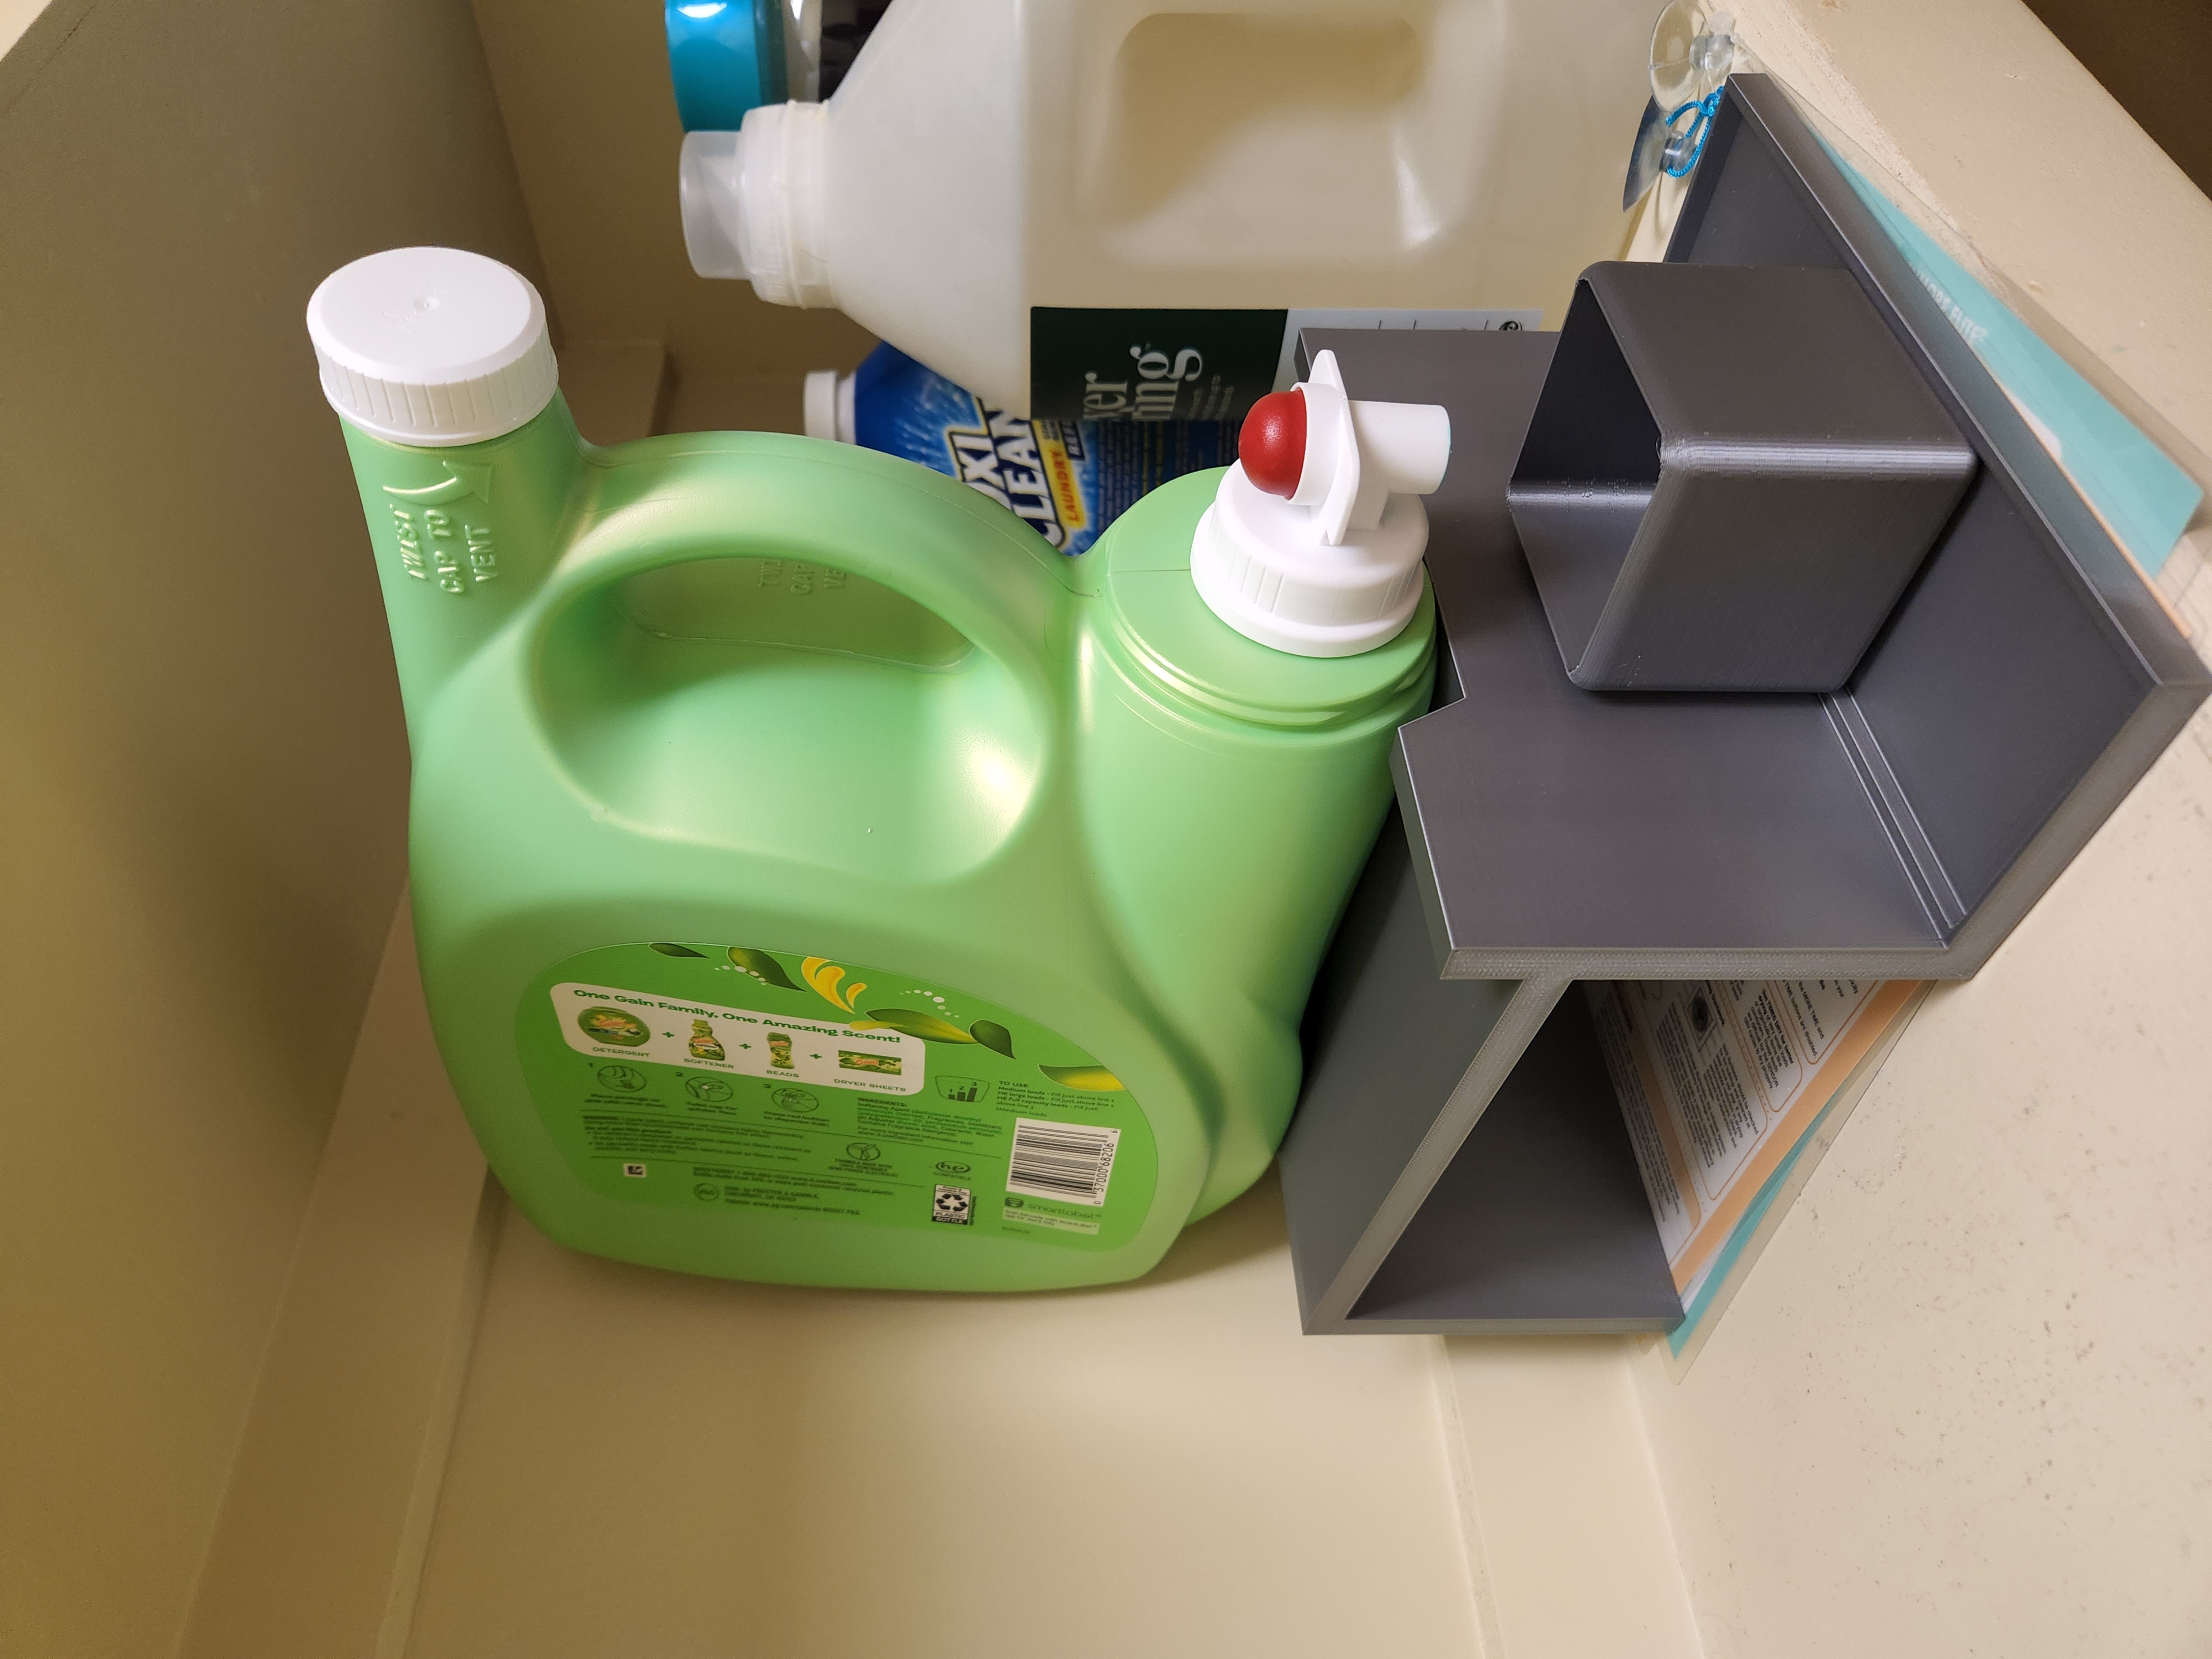 Laundry Detergent Holder and Cup